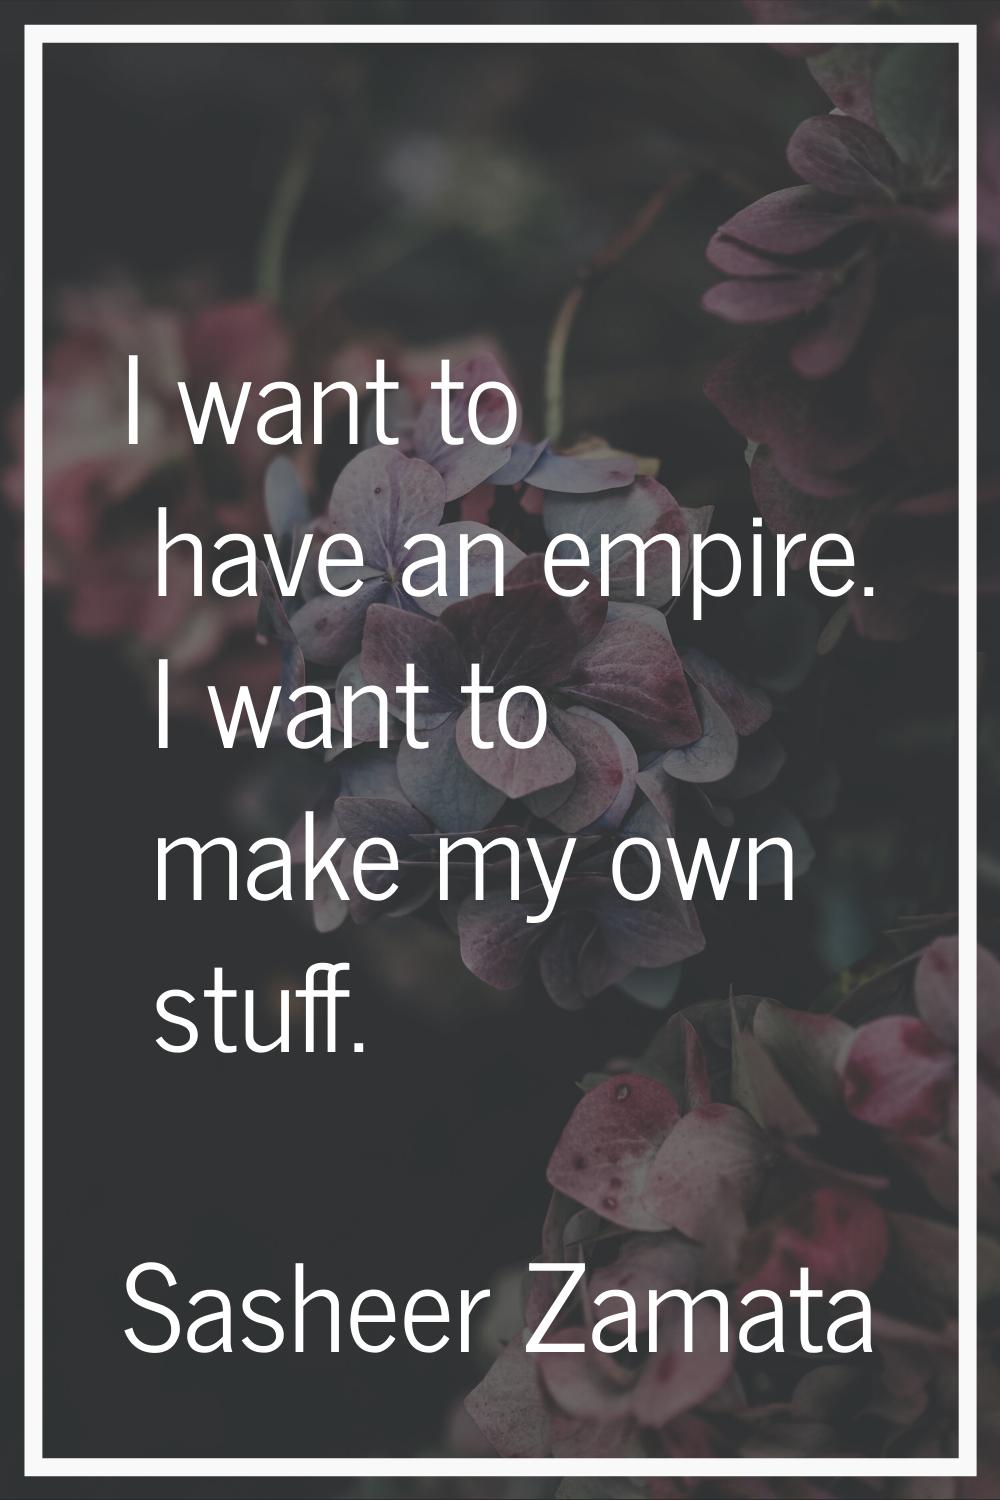 I want to have an empire. I want to make my own stuff.